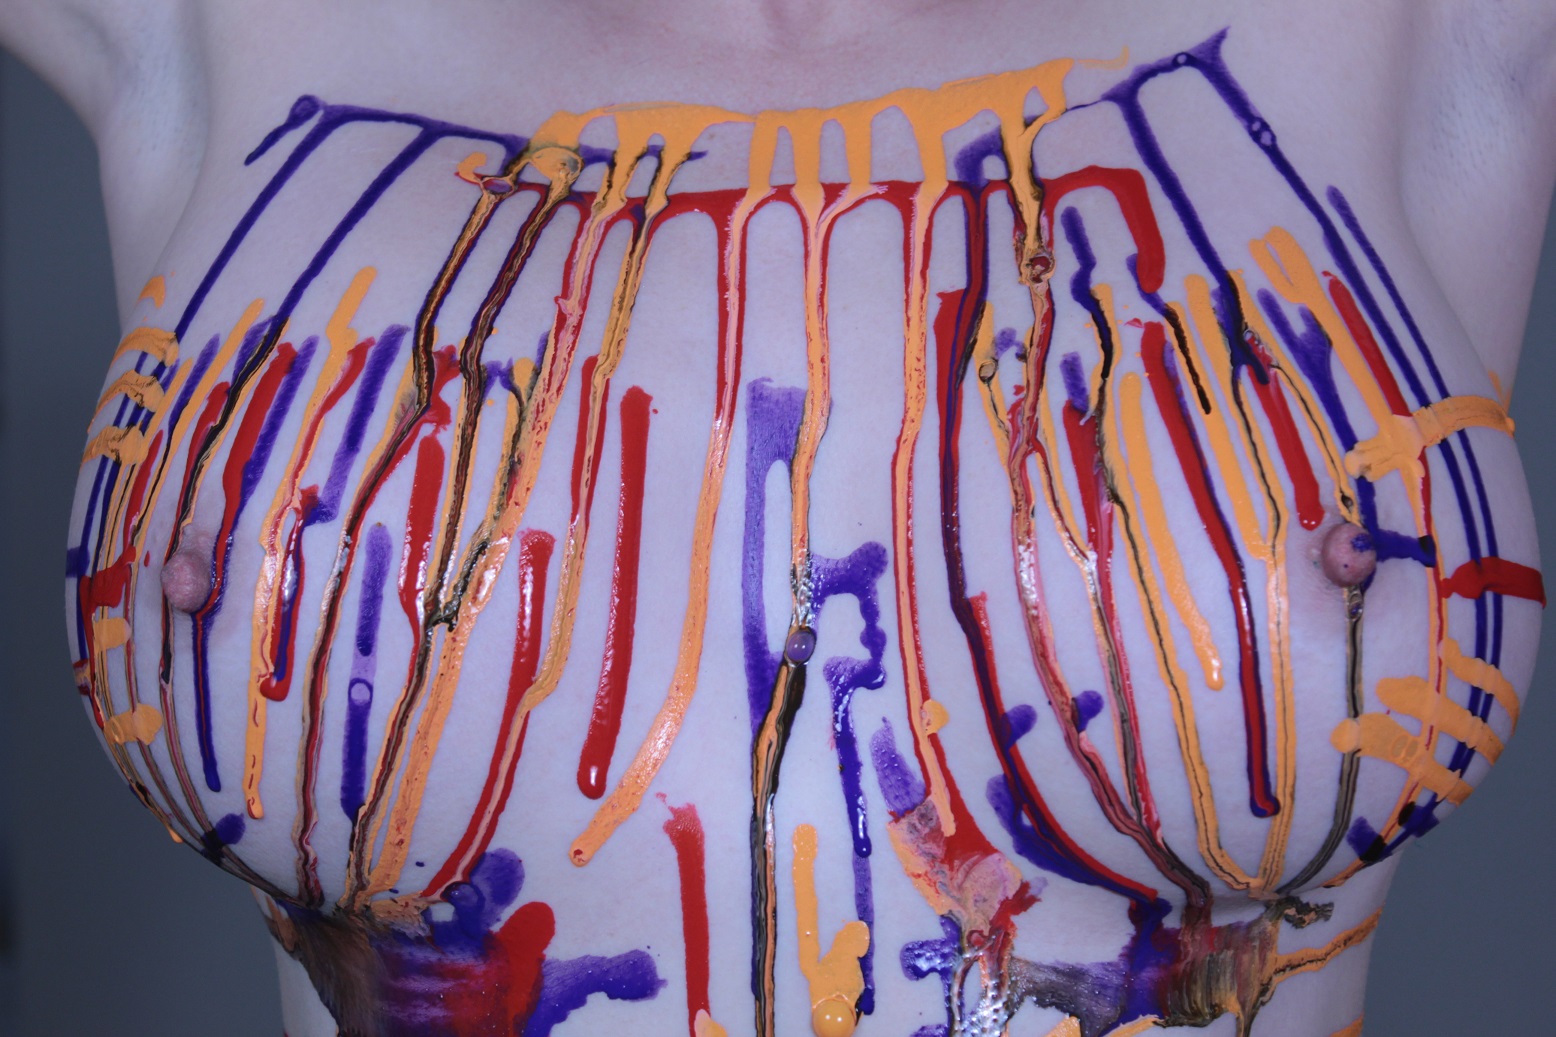 Orange, Blue and Red body paint dripping on female torso